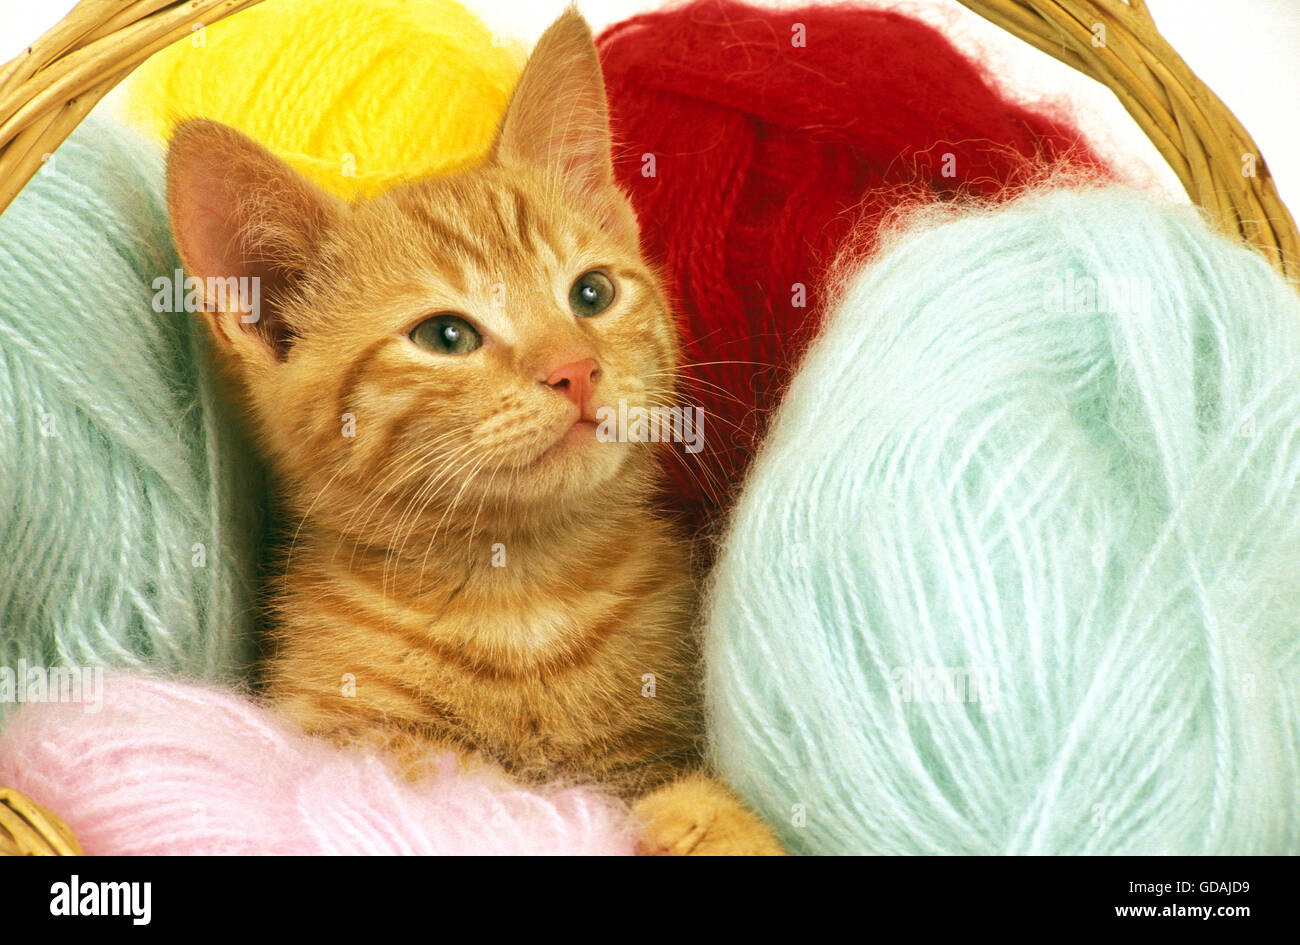 RED TABBY DOMESTIC CAT, KITTEN IN WOLL BALLS Stock Photo